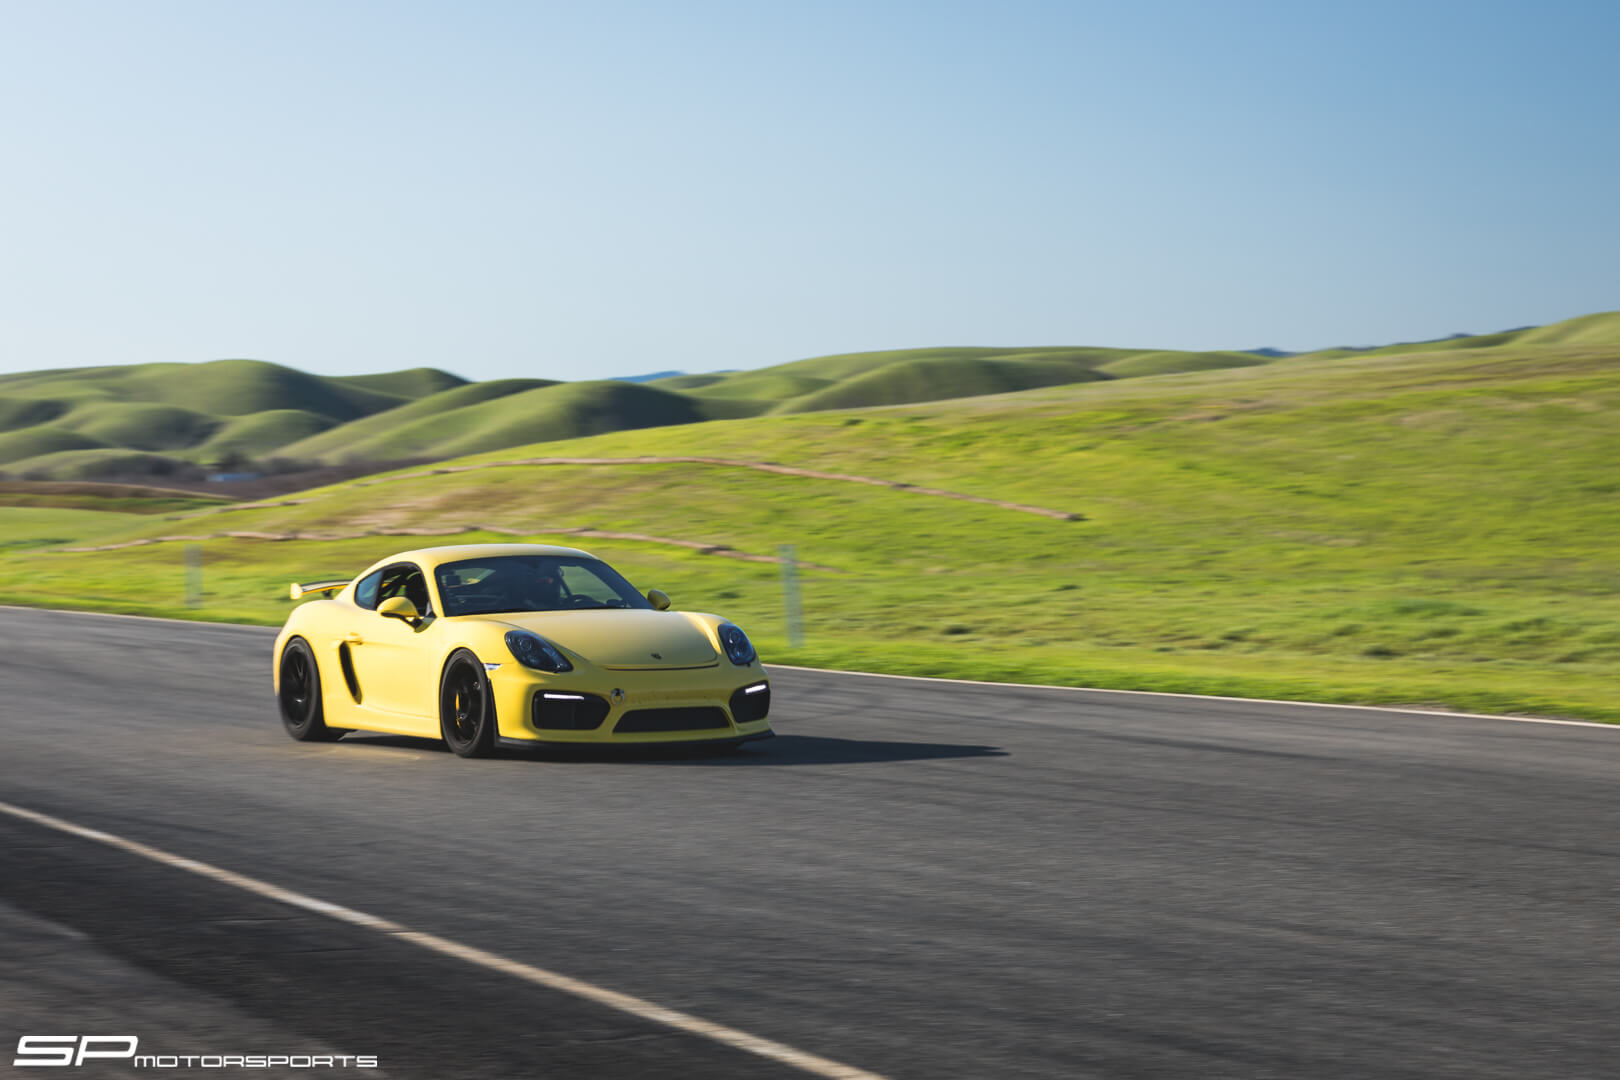 SP Motorsports Arrive and Drive Car at Thunderhill